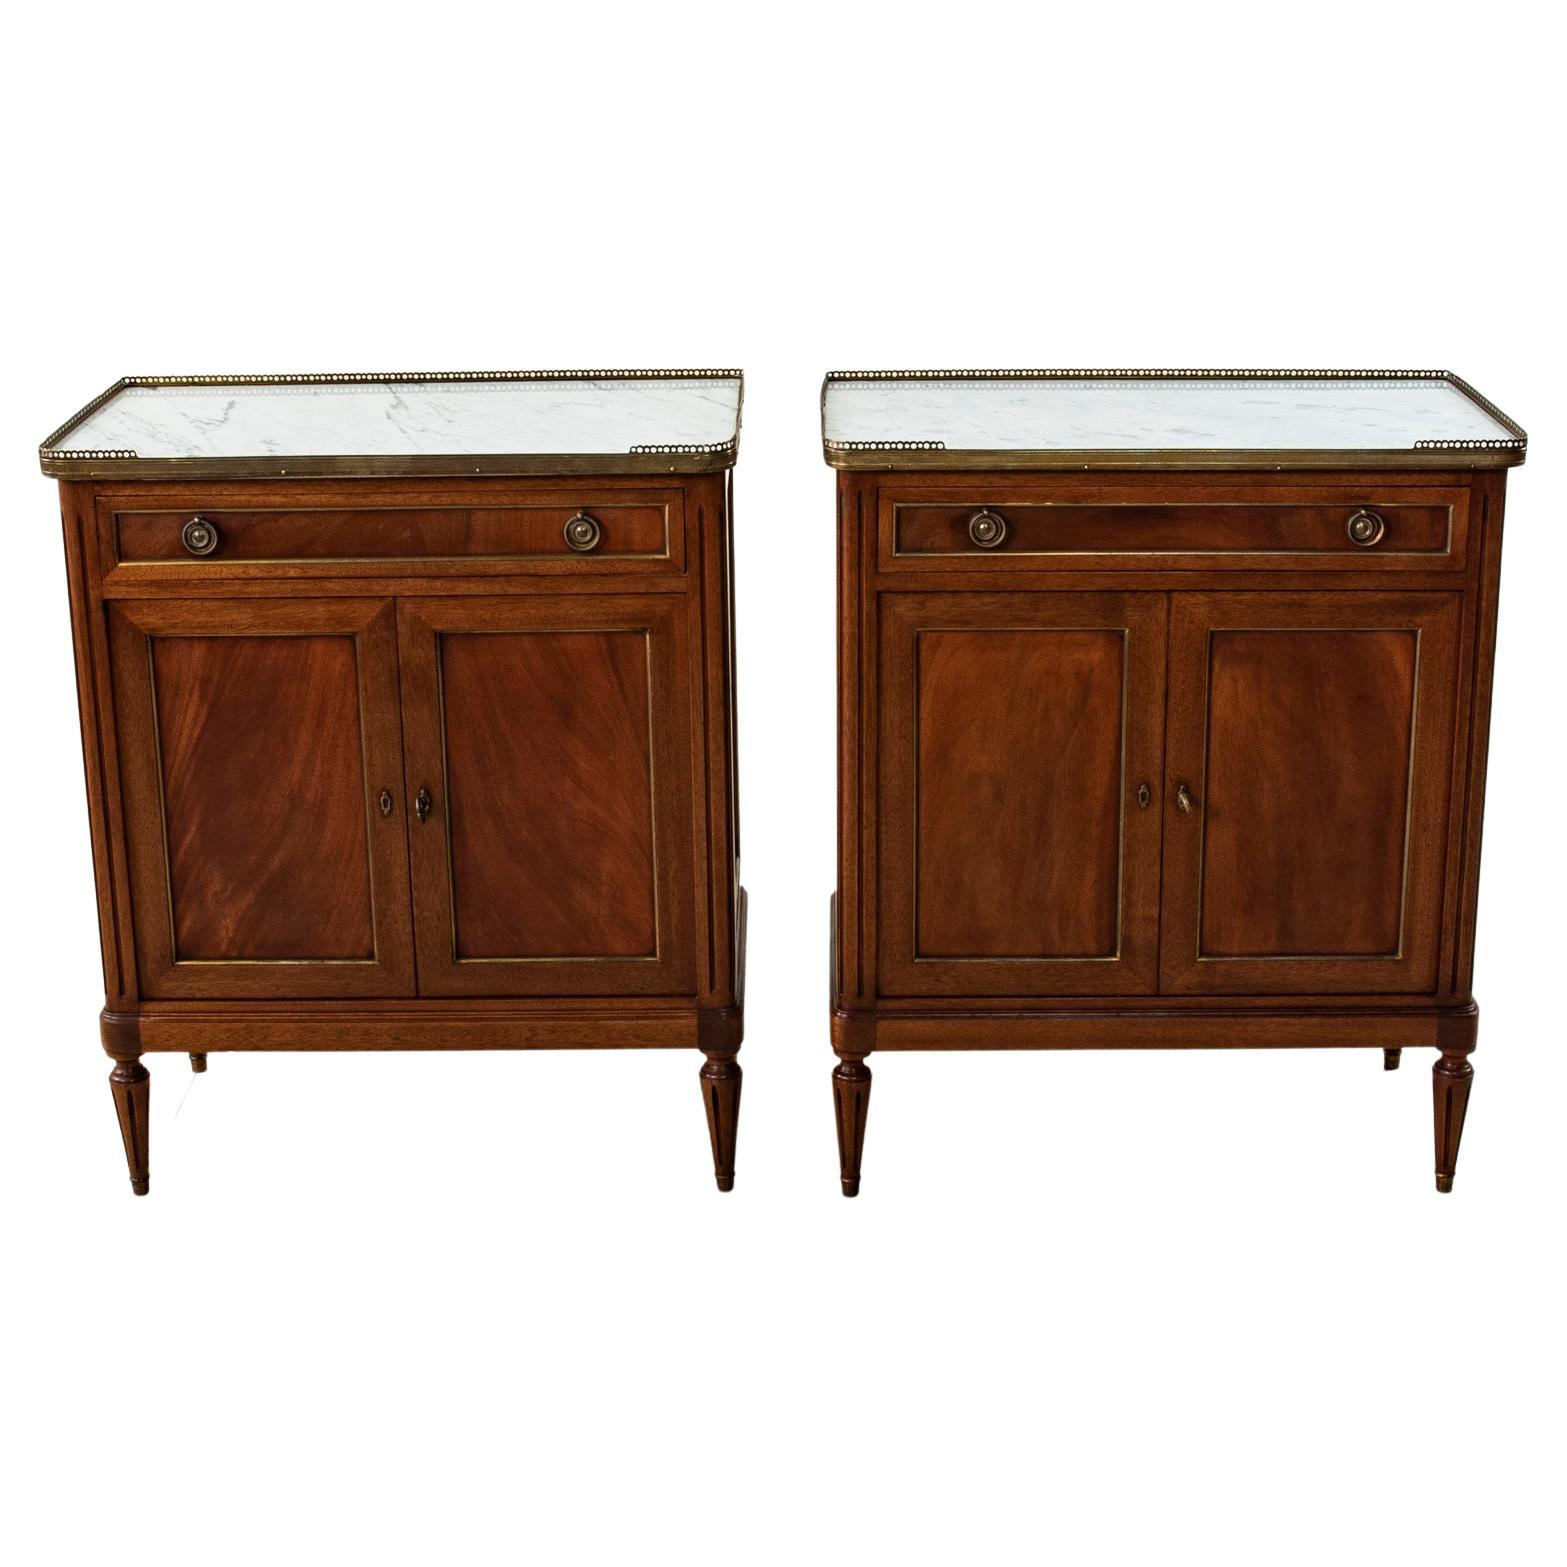 Pair of Early 20th Century French Louis XVI Style Mahogany Buffets, Nightstands